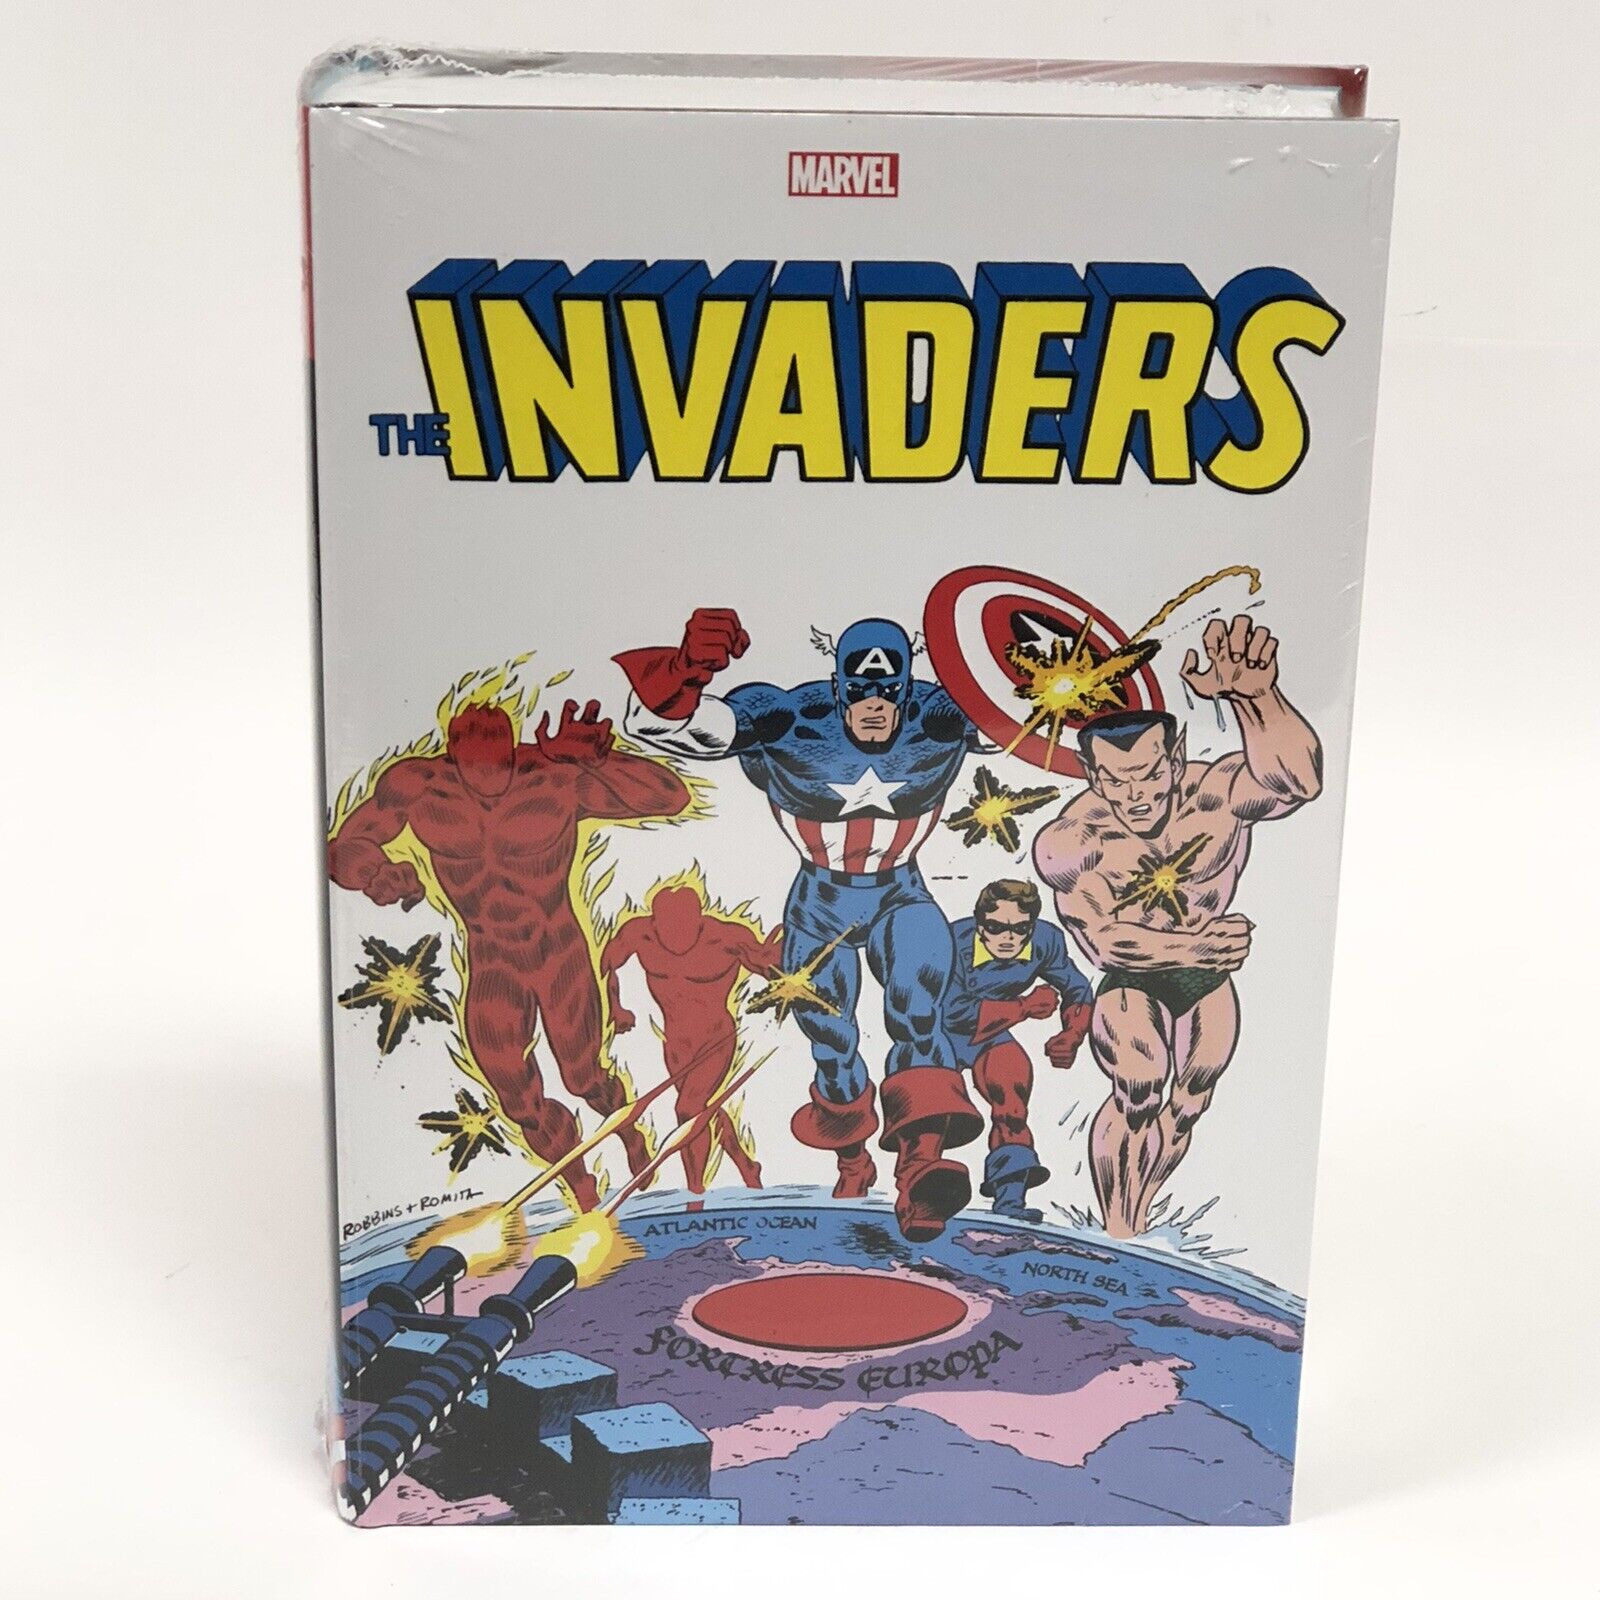 Invaders Omnibus New Marvel Comics HC Hardcover Sealed Frank Robbins Cover